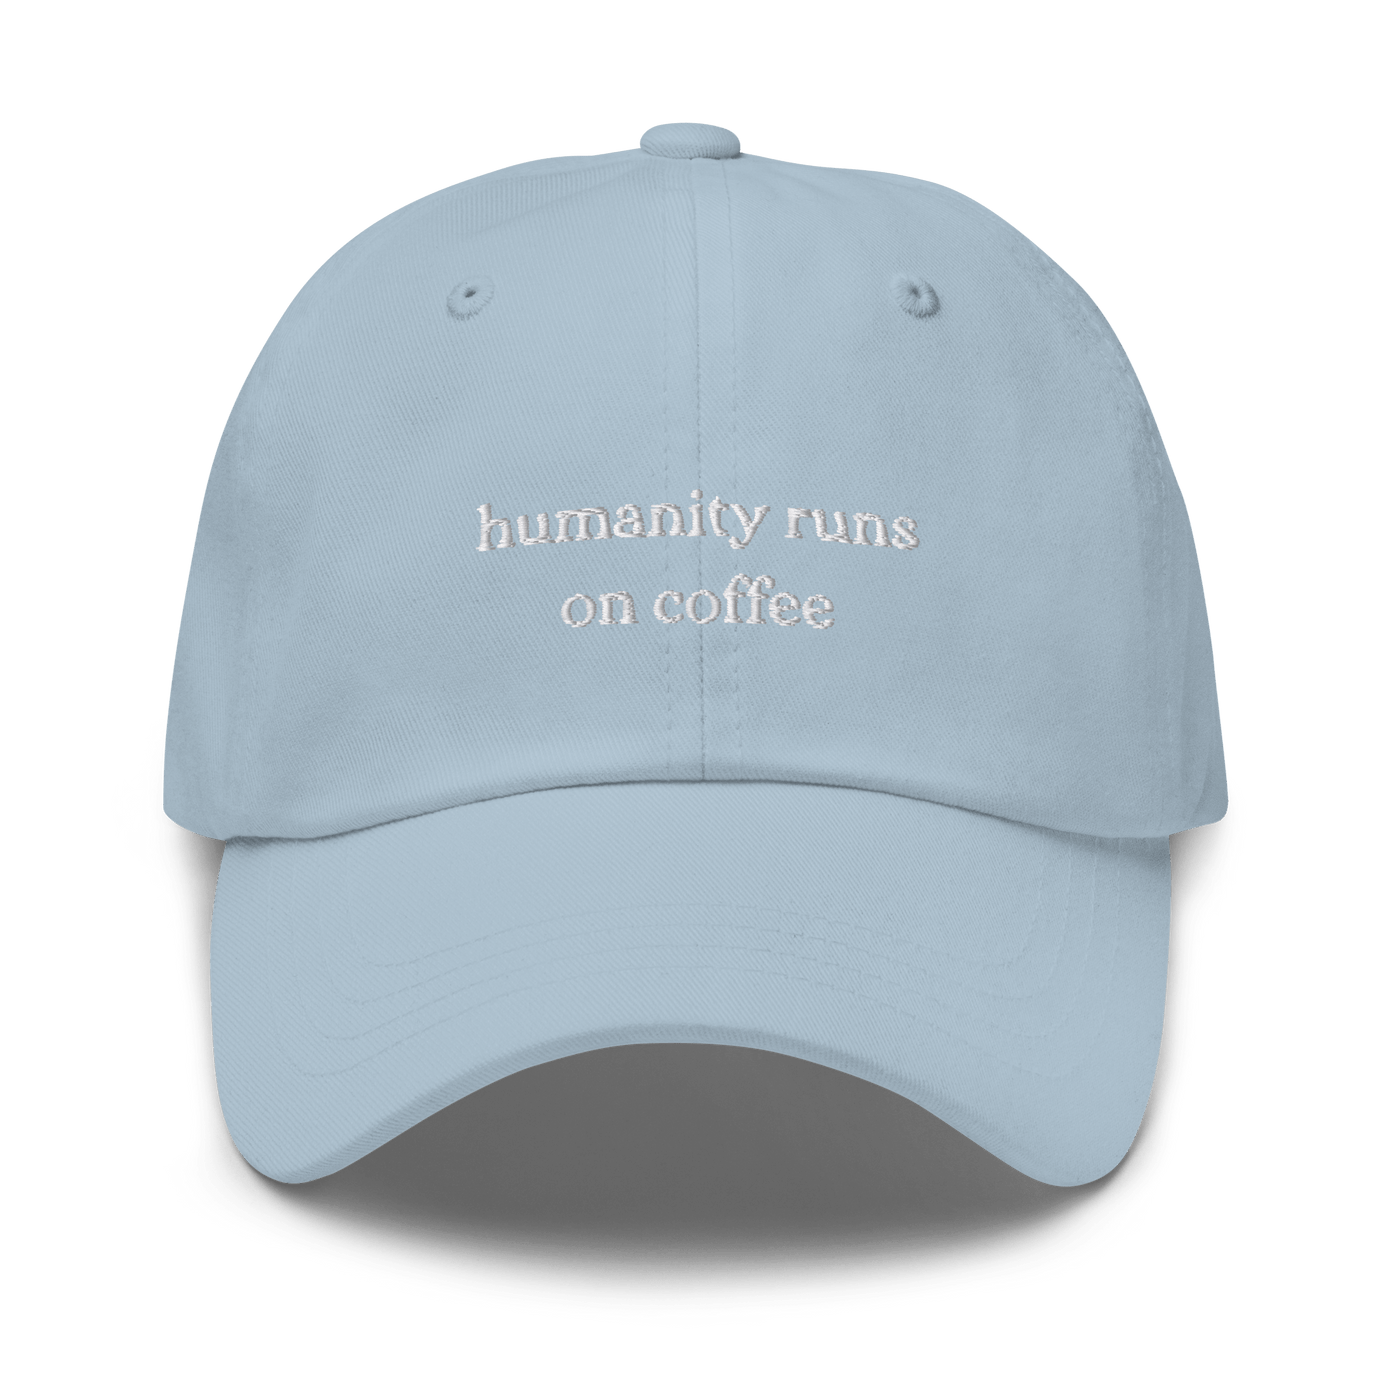 Humanity Runs on Coffee Dad hat - Light Blue - - Just Another Cap Store